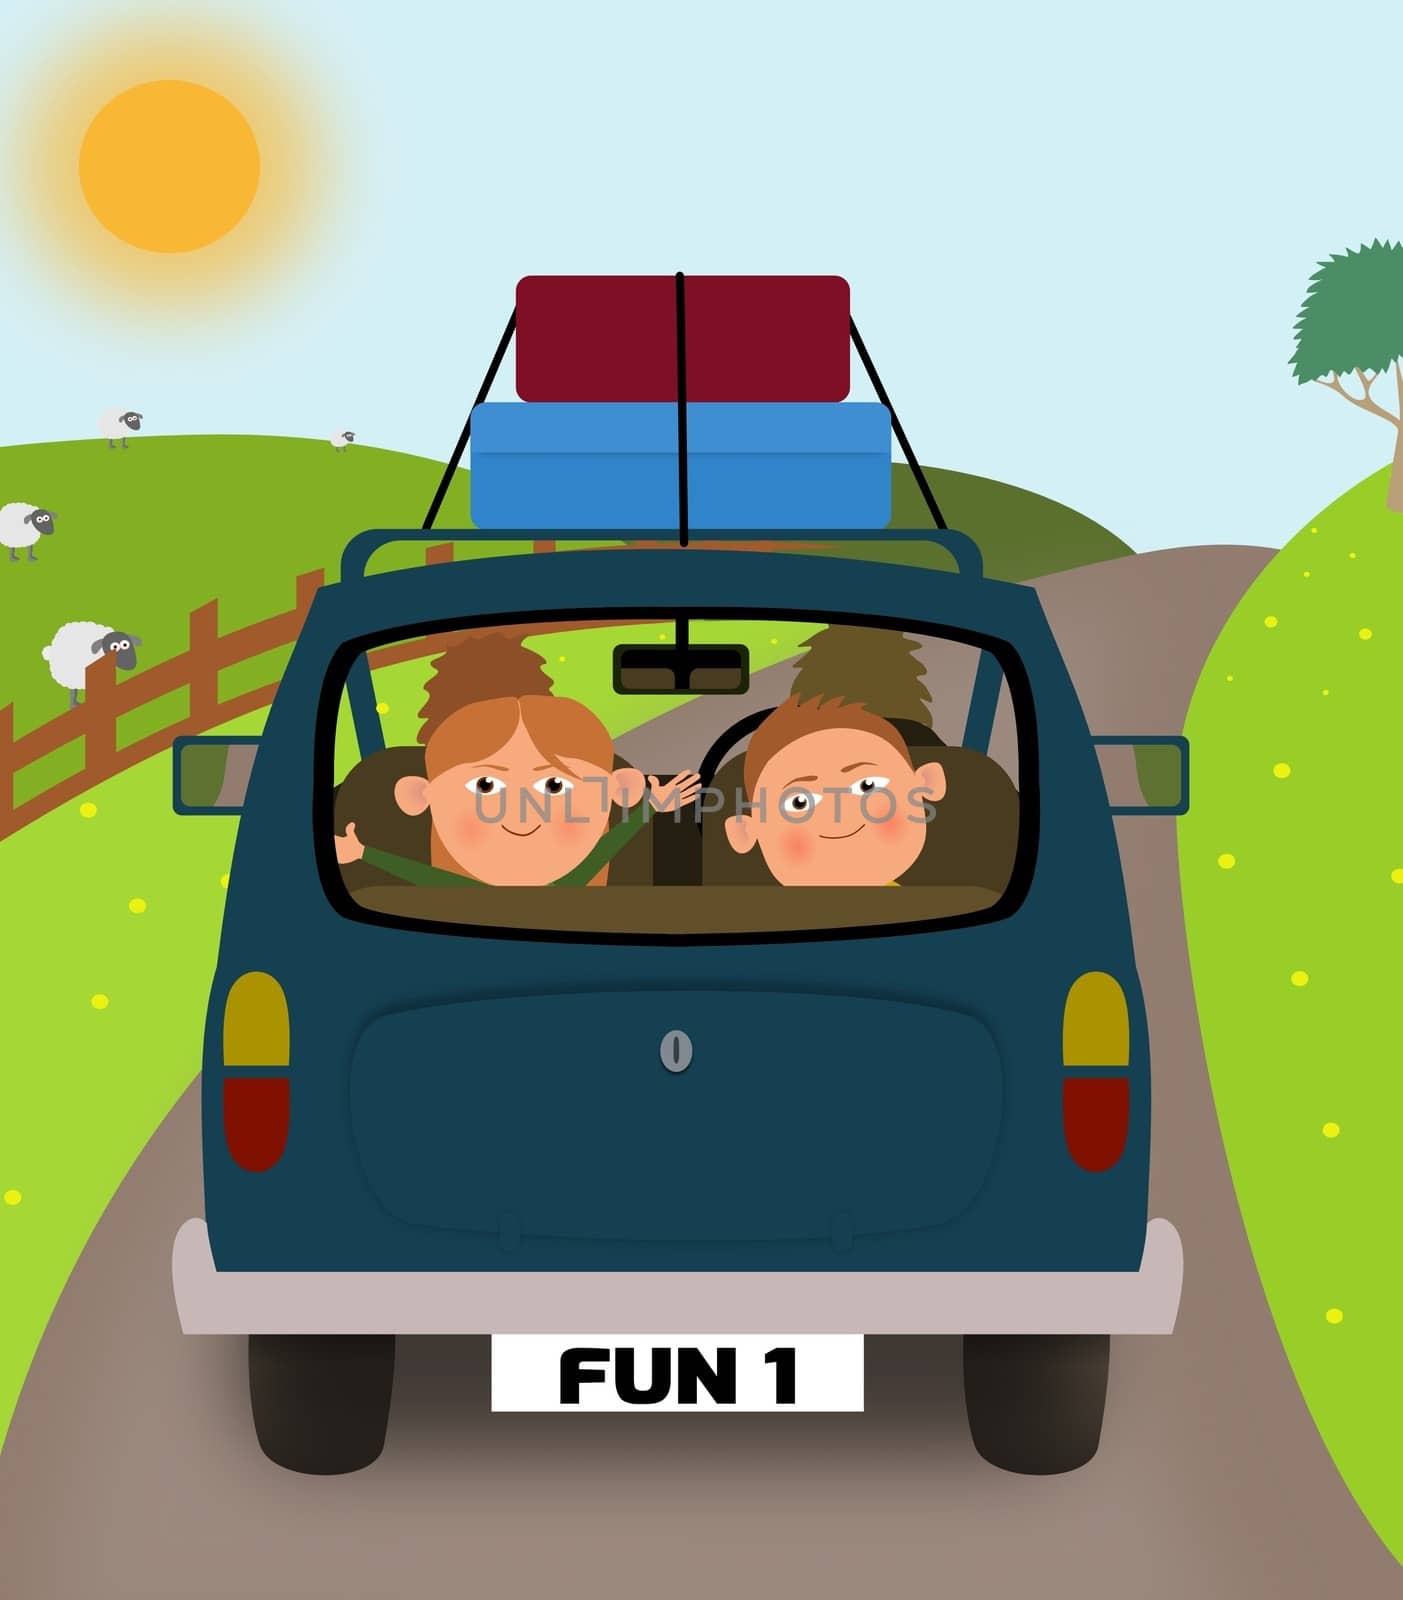 Illustration of a family going on holiday in a car